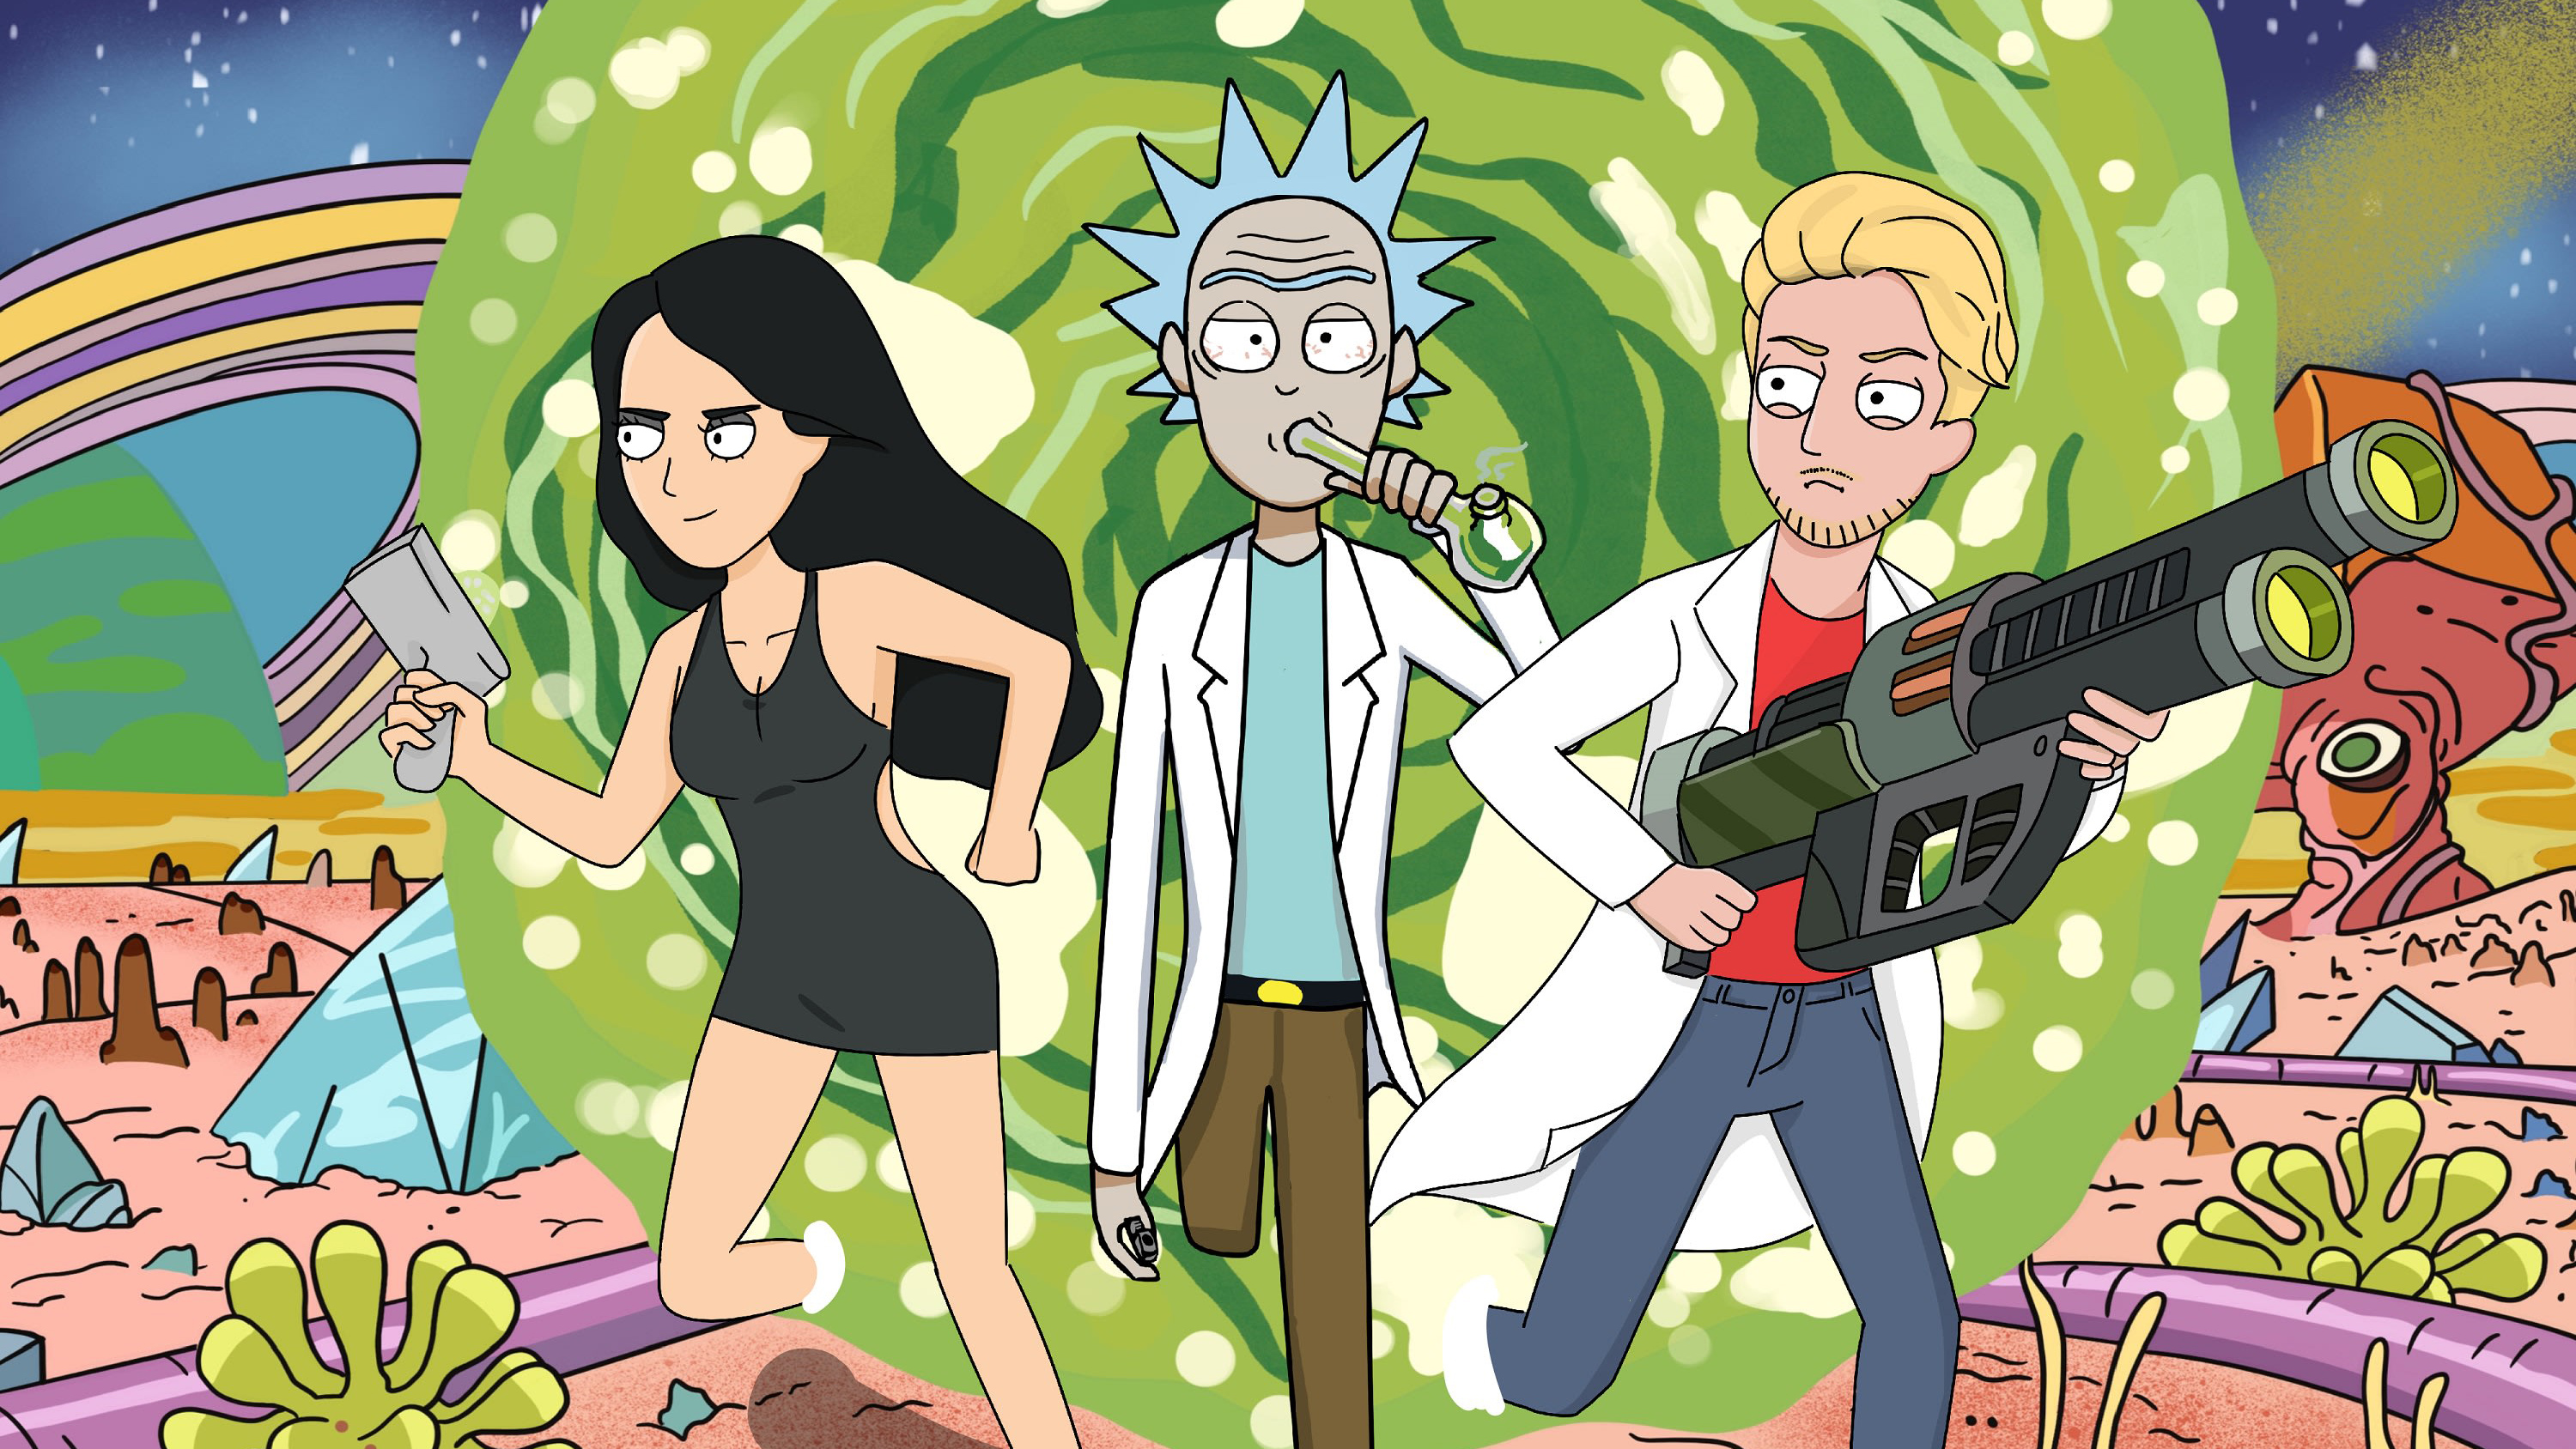 Netflix Rick And Morty Style Out Portal, HD Tv Shows, 4k